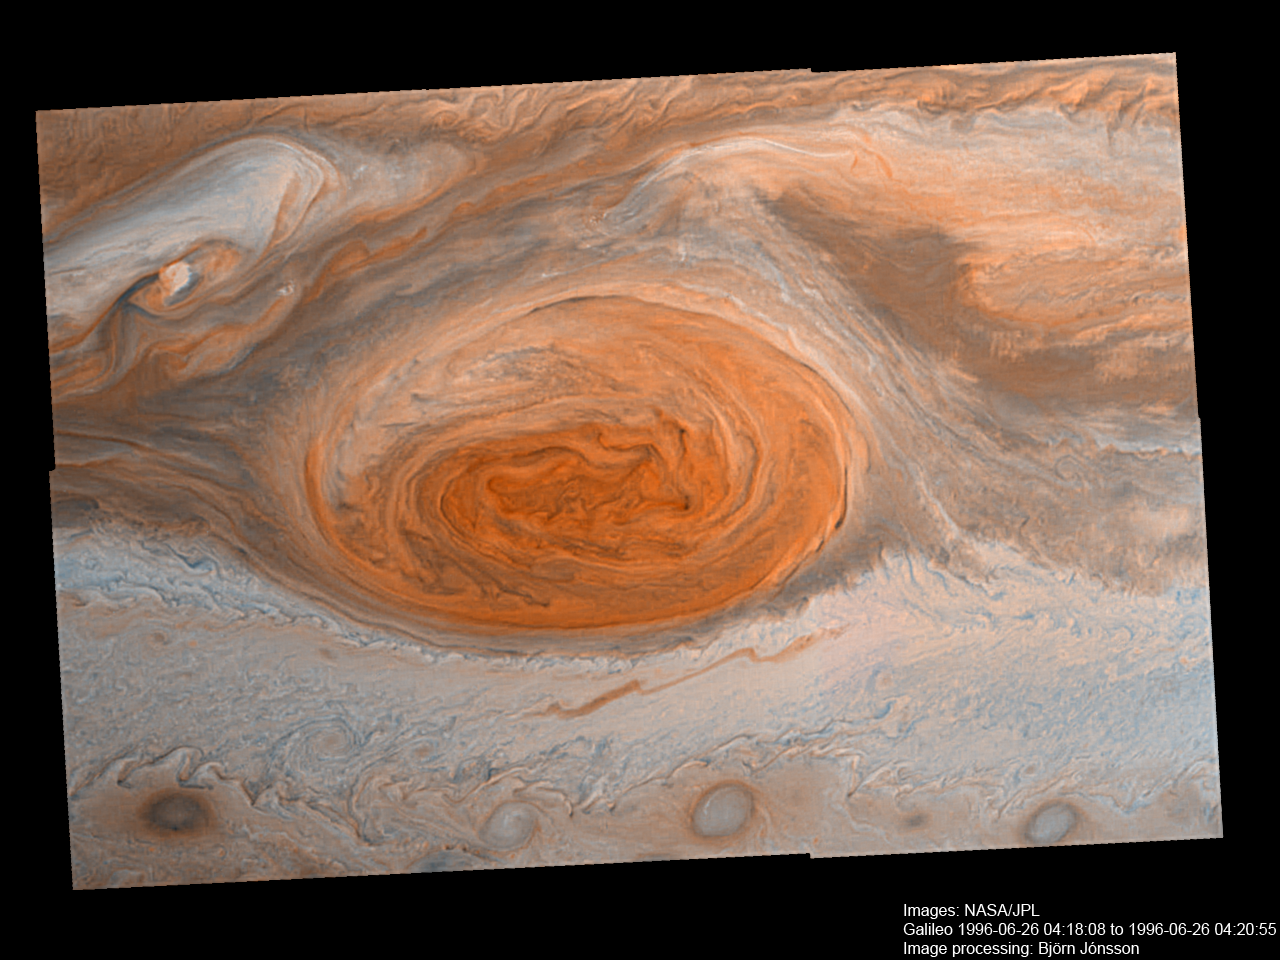 Jupiter's Great Red Spot | The Planetary Society